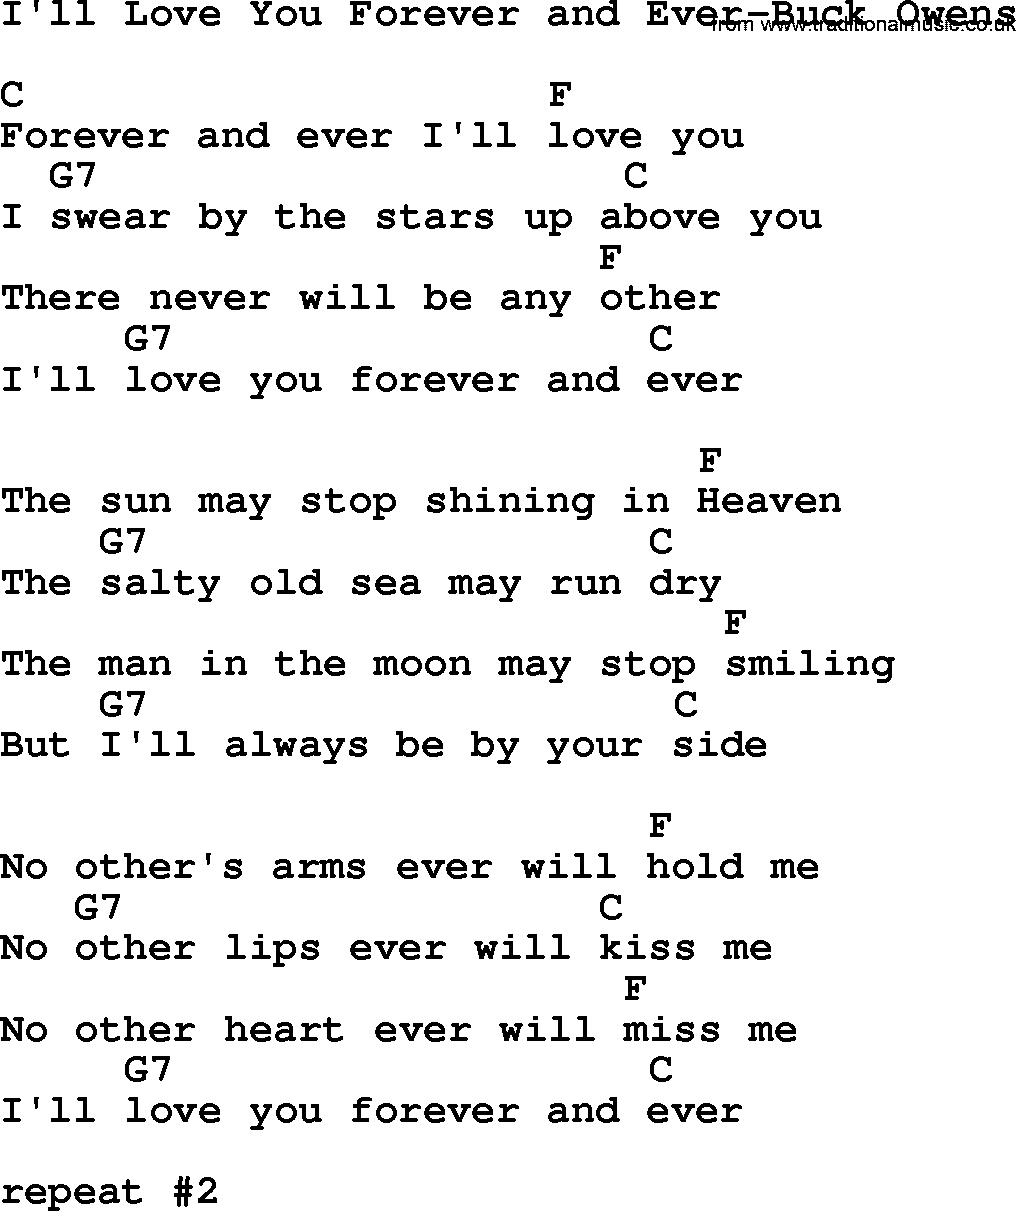 Country music song: I'll Love You Forever And Ever-Buck Owens lyrics and chords